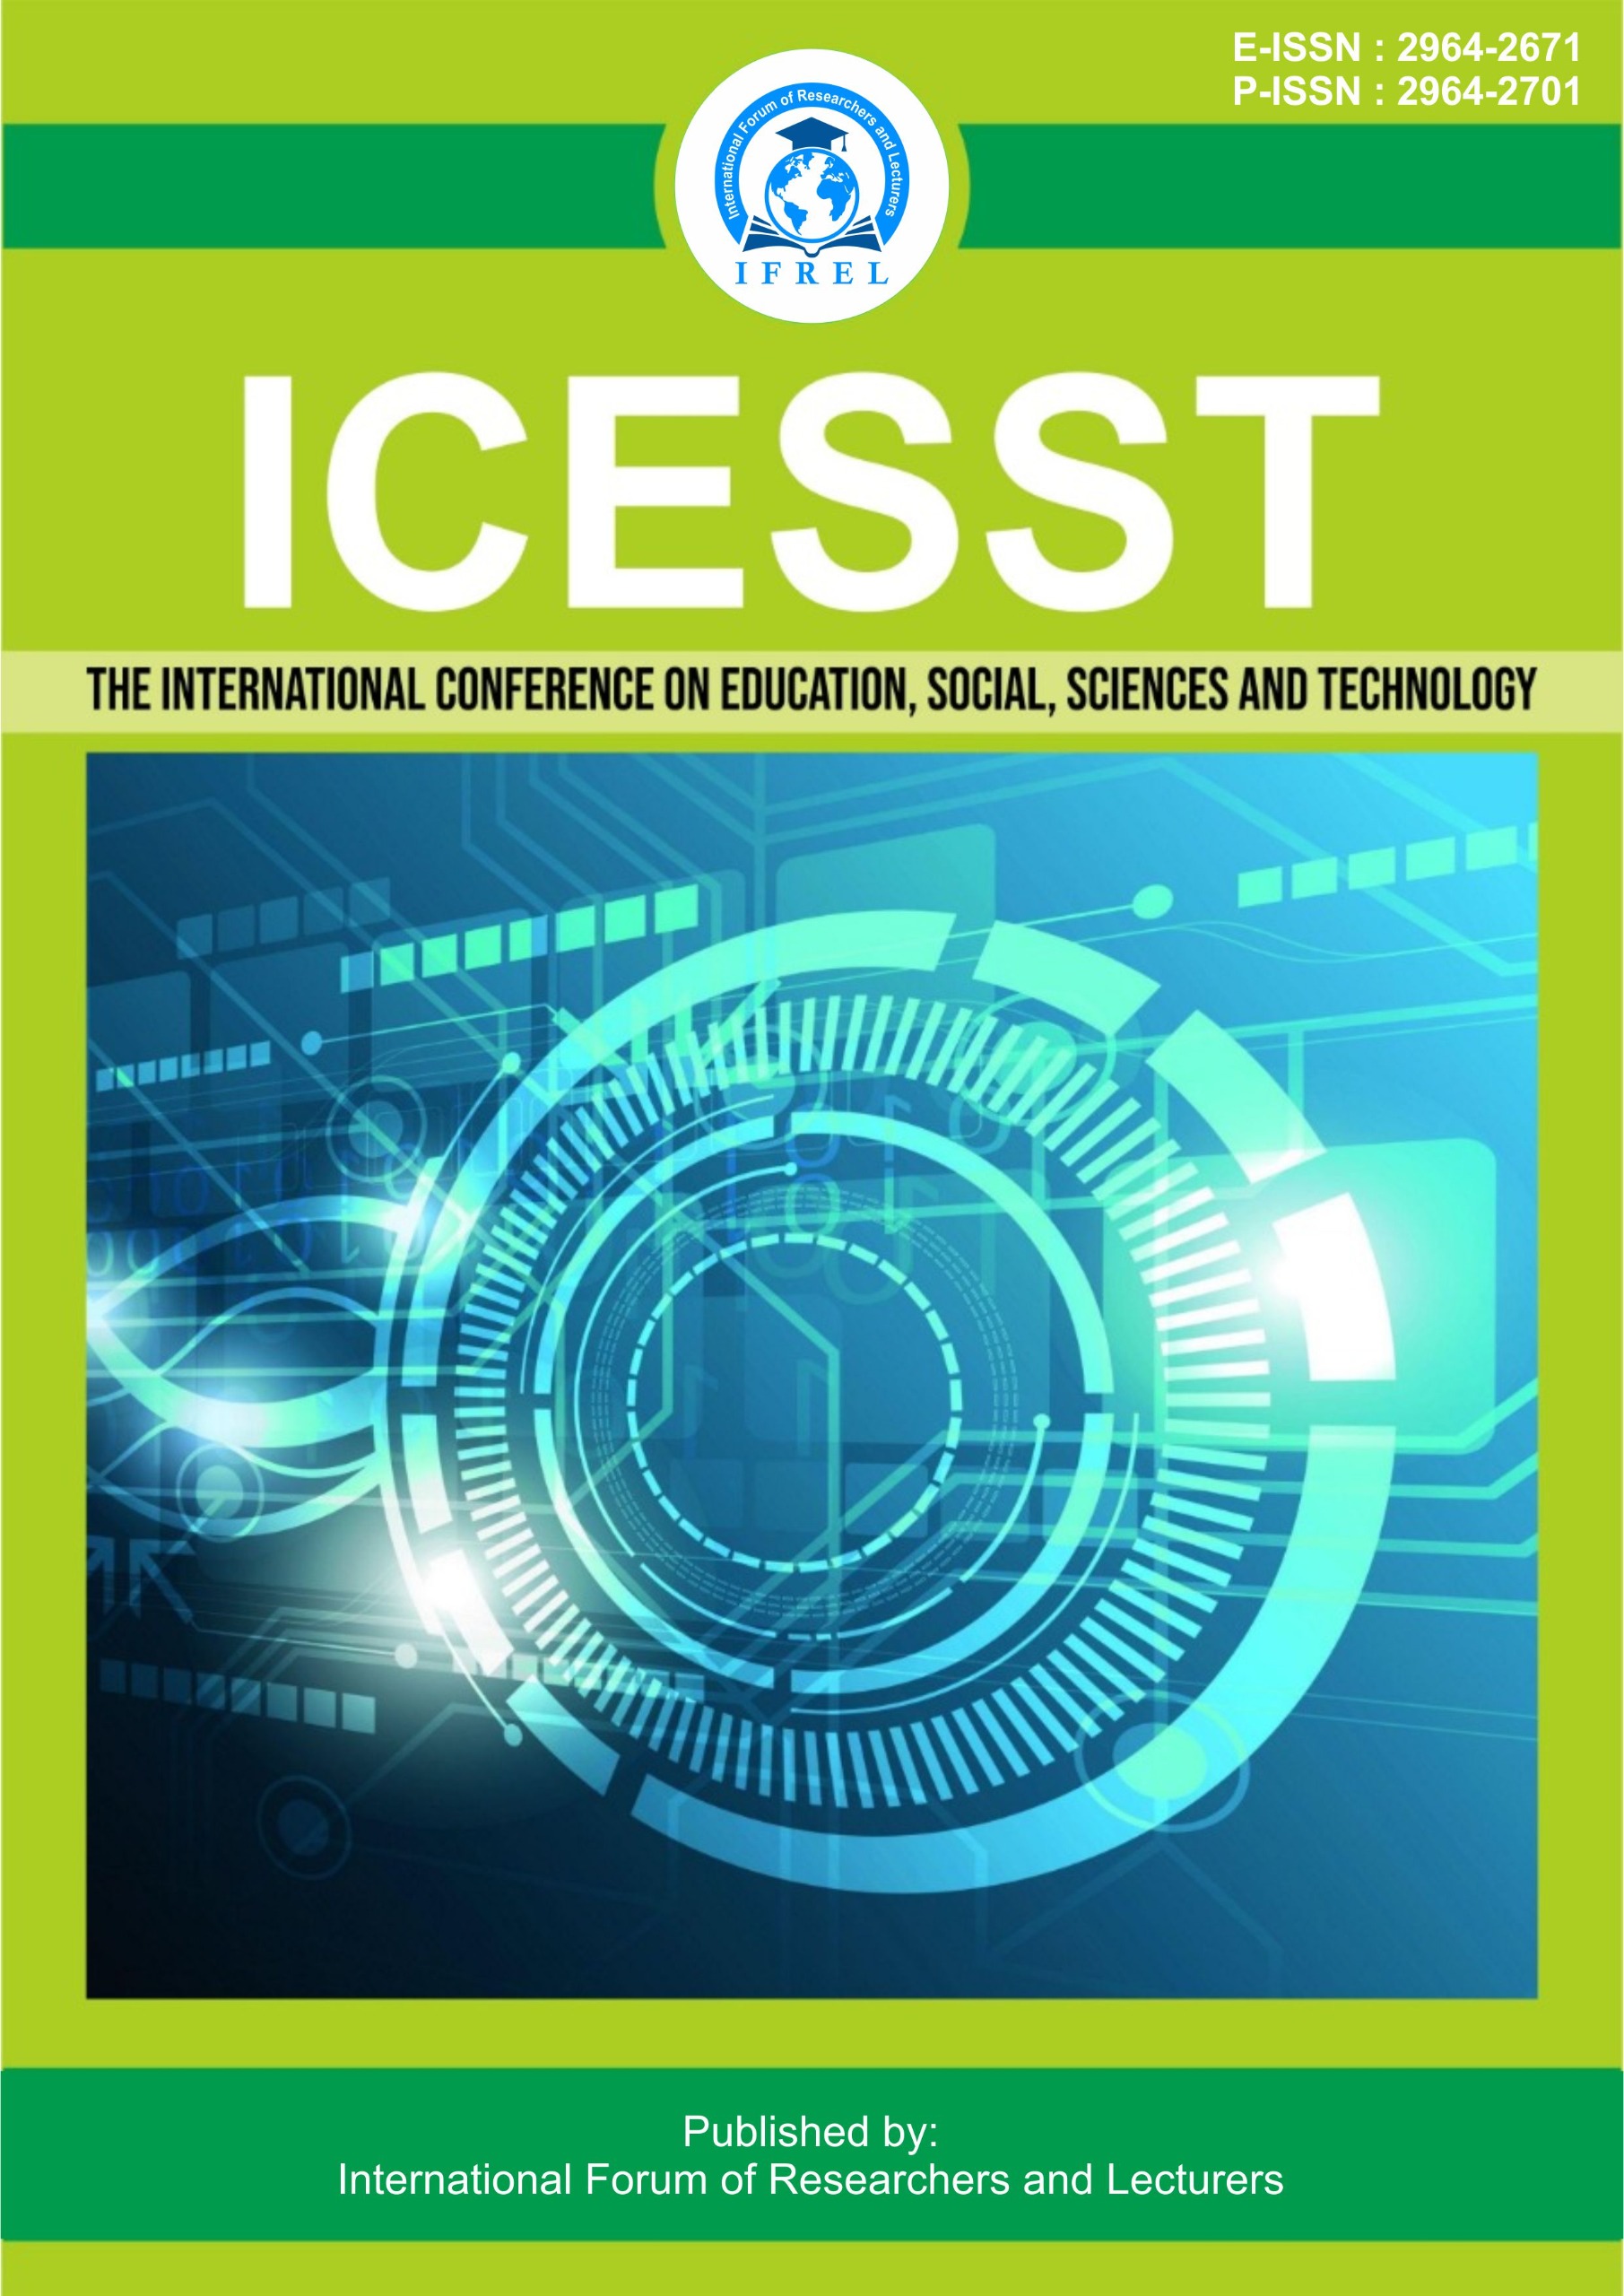 					View Vol. 1 No. 1 (2022): The International Conference on Education, Social Sciences and Technology
				